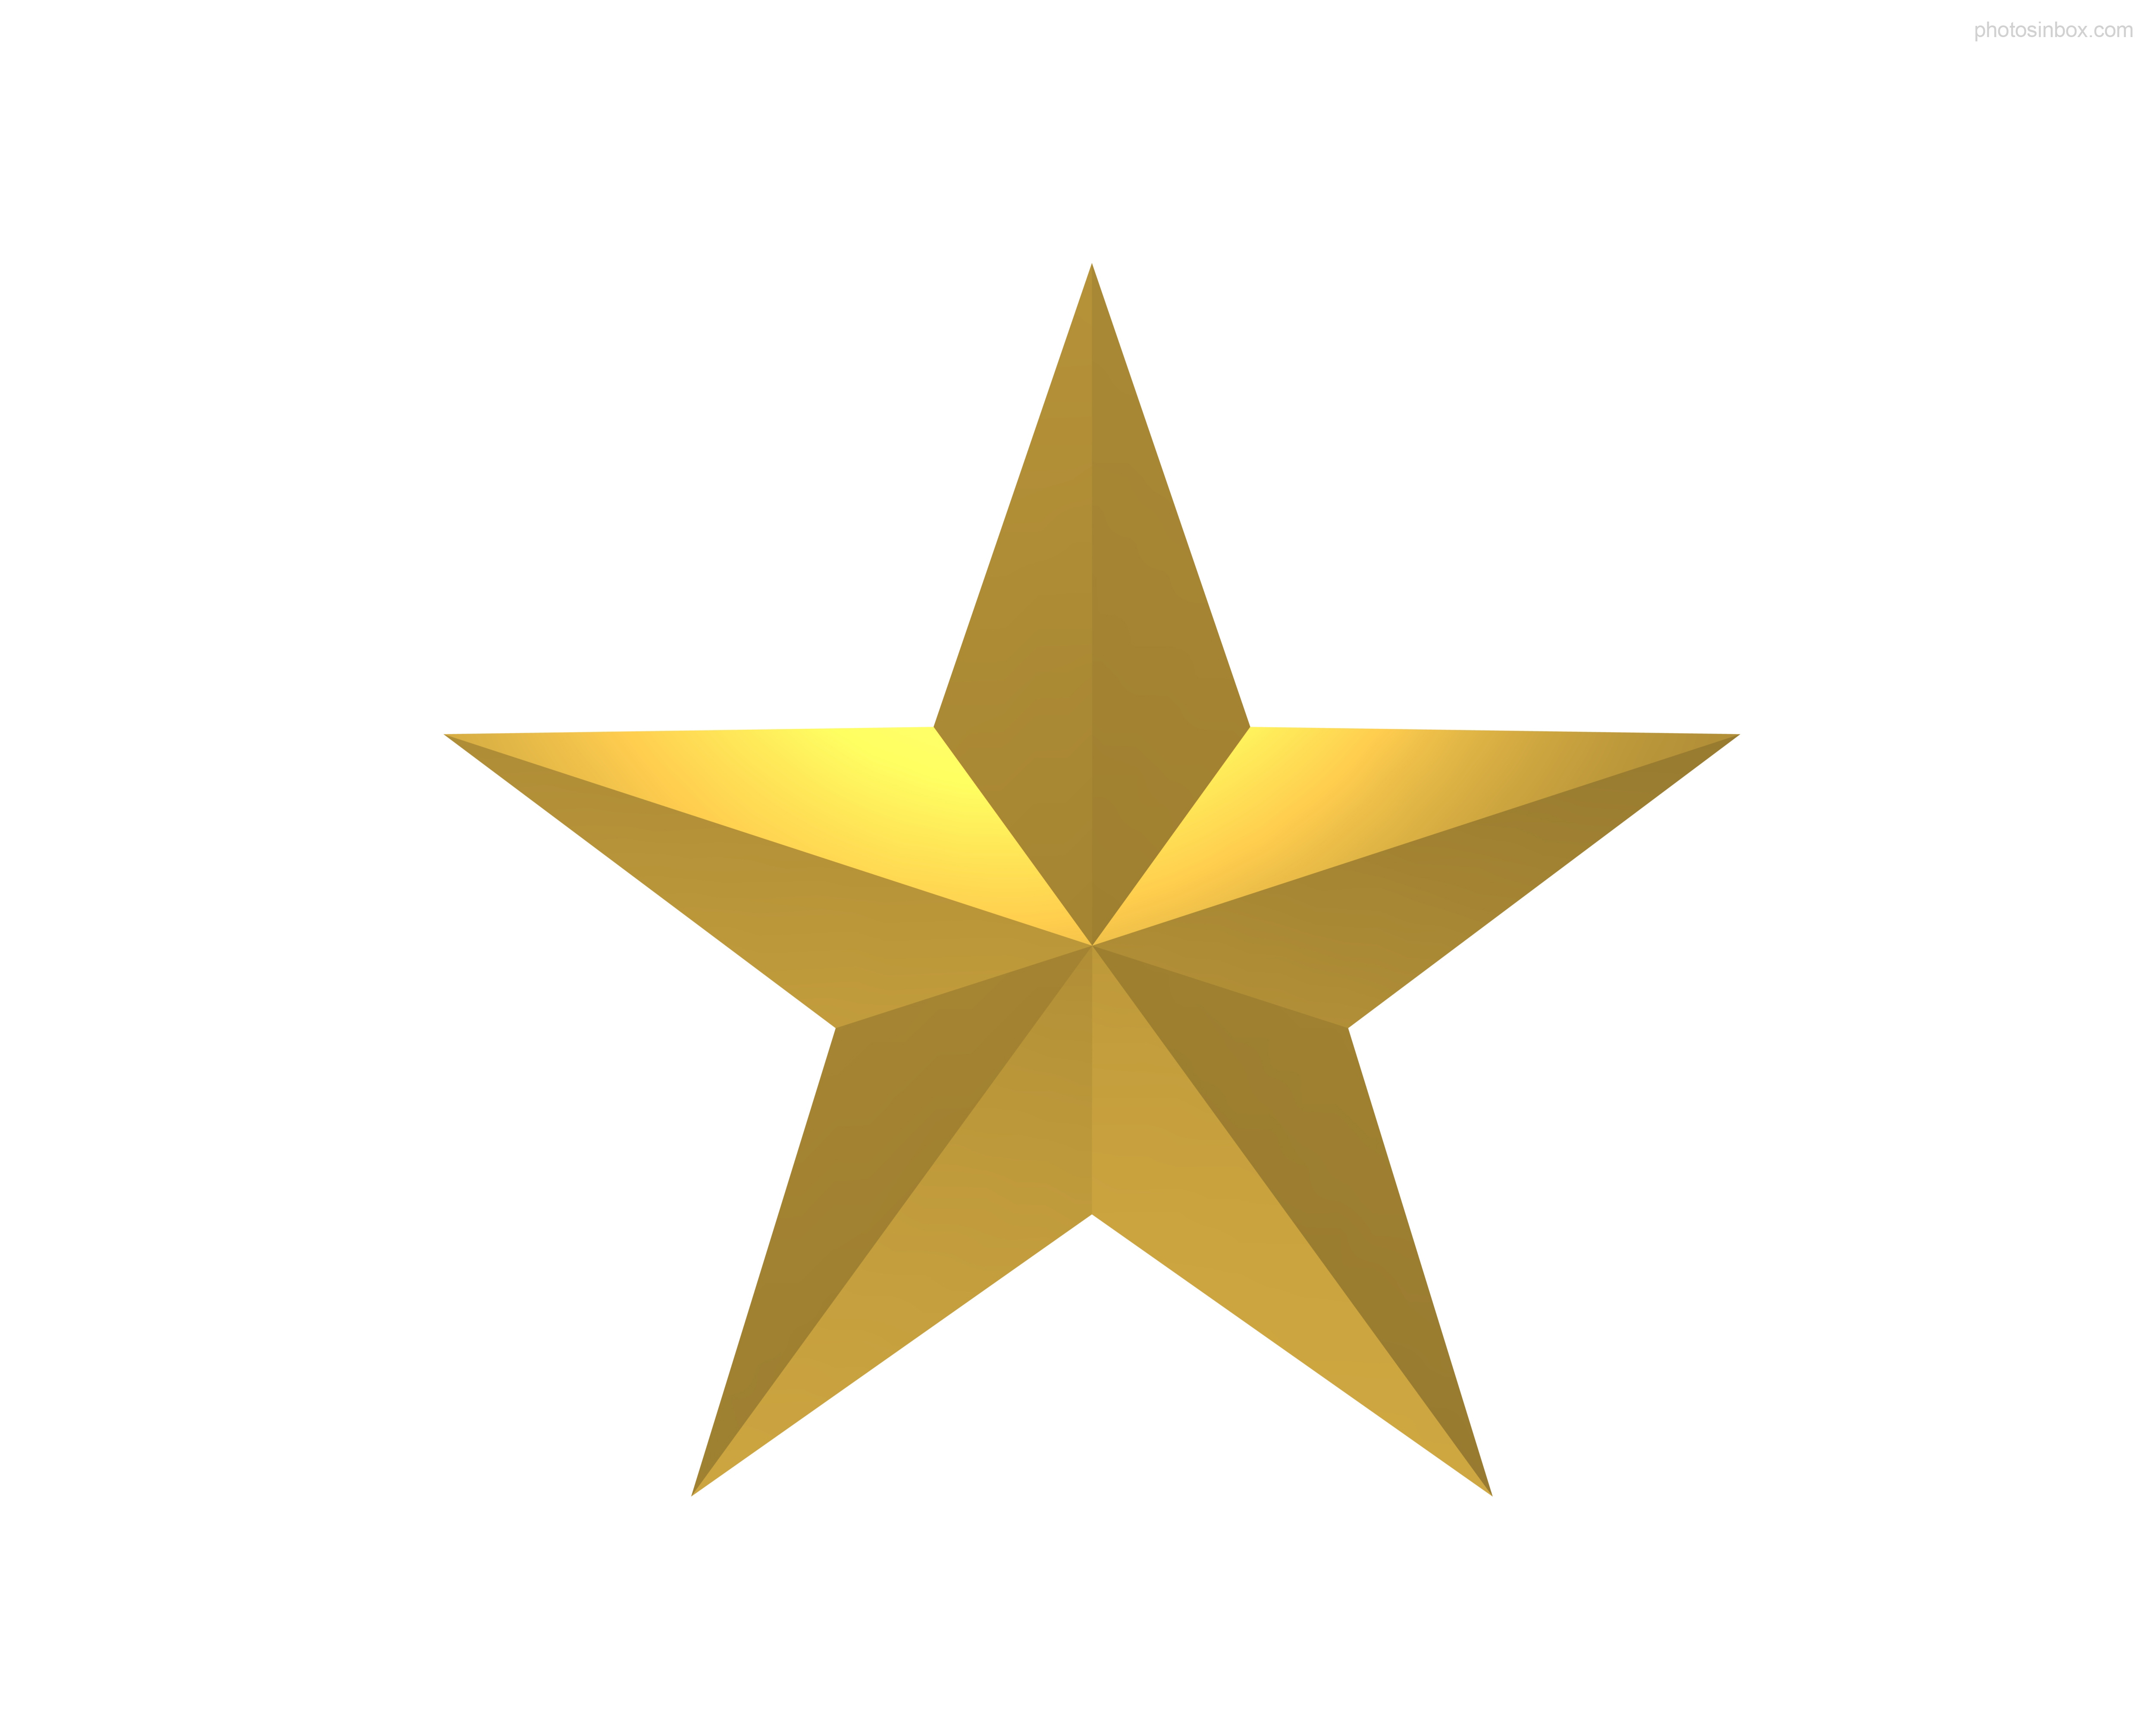 Gold star clipart no background free images 2 - Clipartix